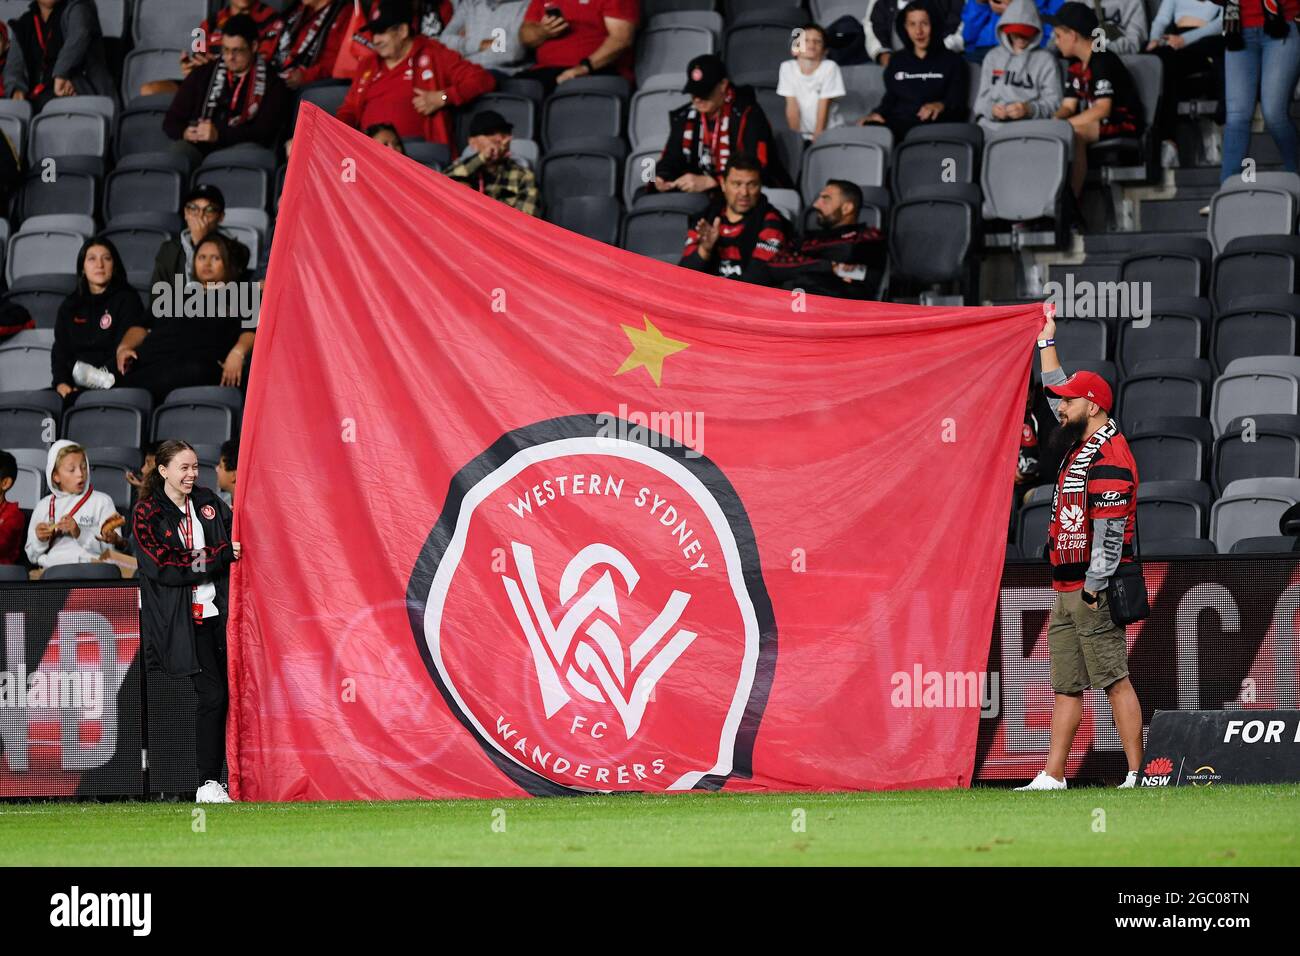 during the A-League soccer match between Western Sydney Wanderers FC and  Brisbane Roar FC on